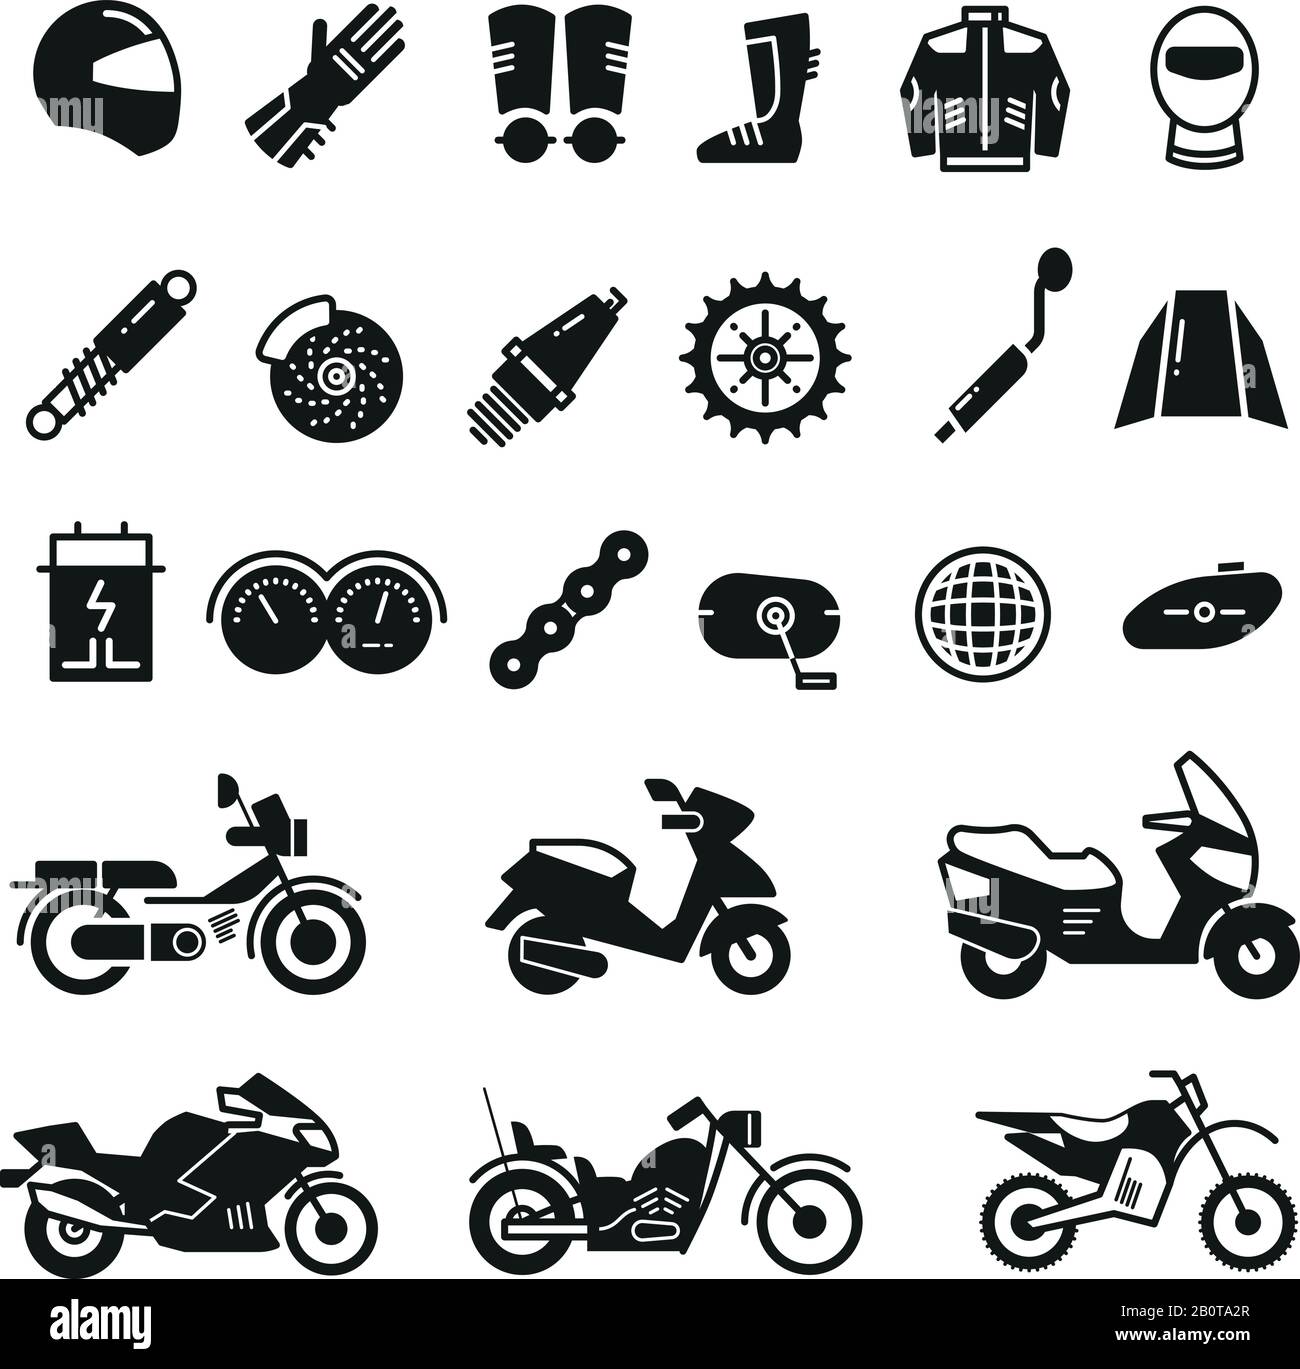 Racing motorcycle, motorbike parts and transportation vector icons. Black silhouette motorcycle, illustration of parts for motorcycle Stock Vector